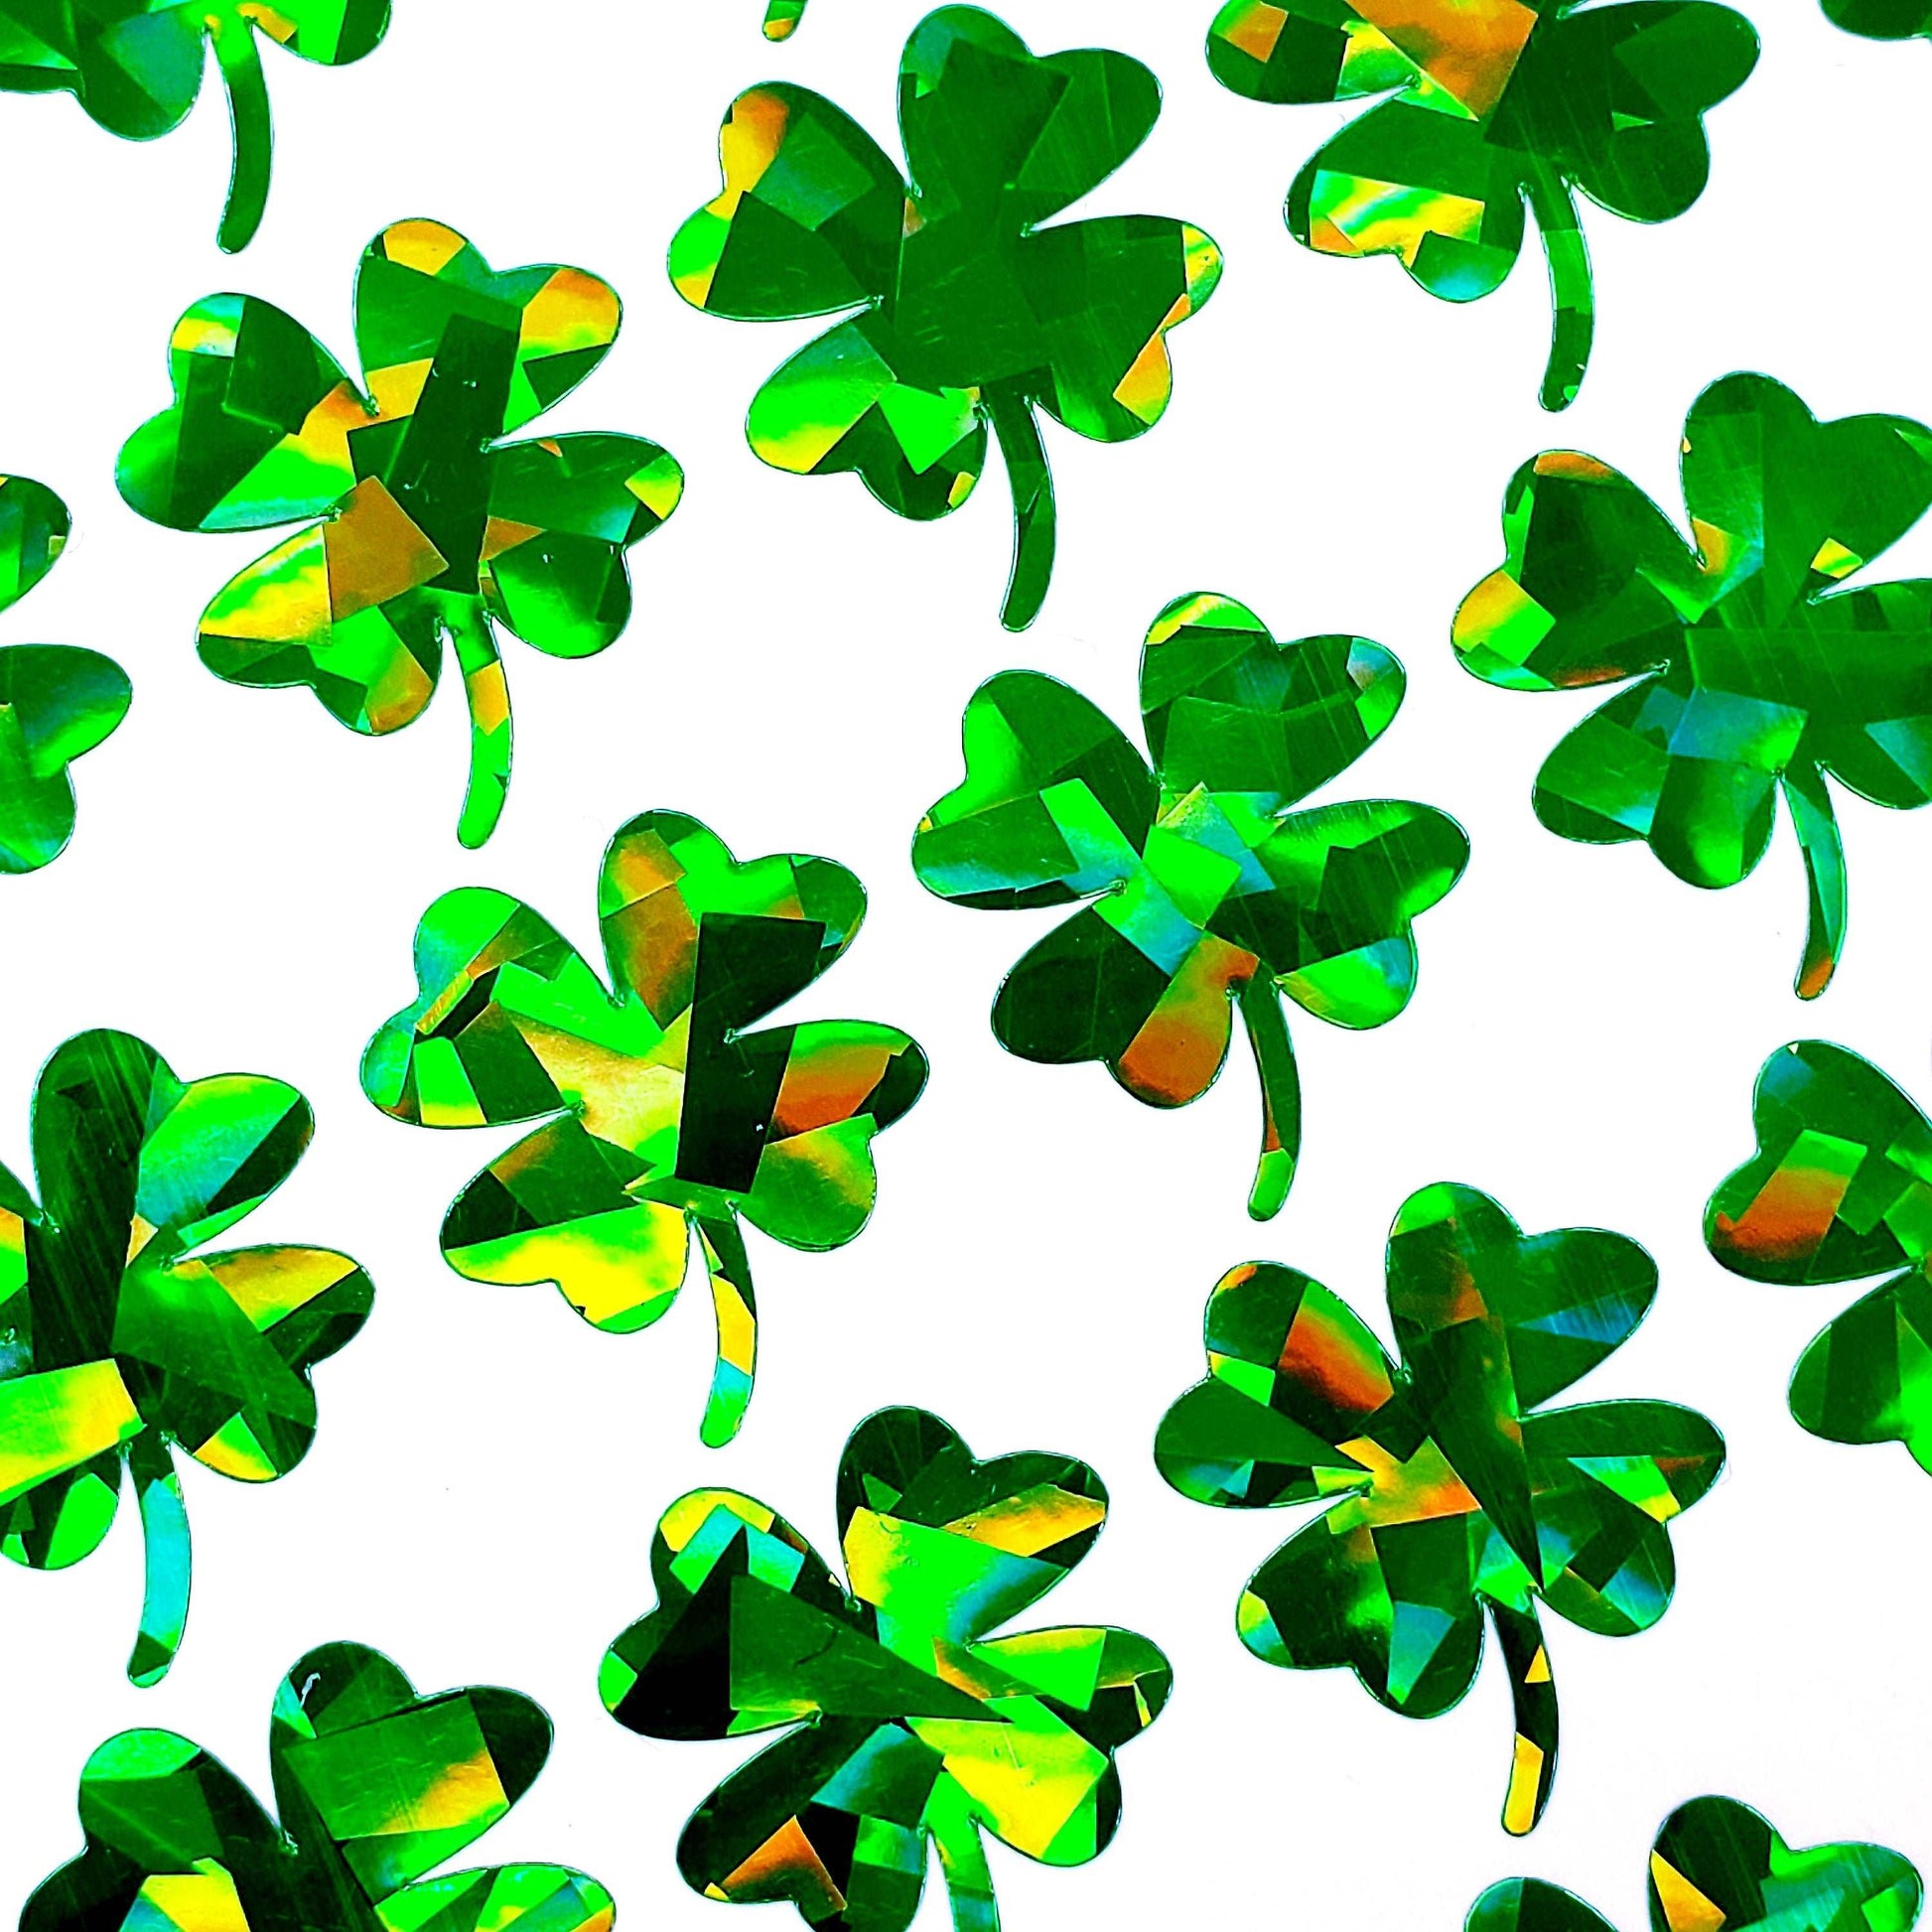 St. Patrick's Day Four Leaf Clover Stickers, set of 48 spring green sparkly lucky clovers shamrocks each 3/4"